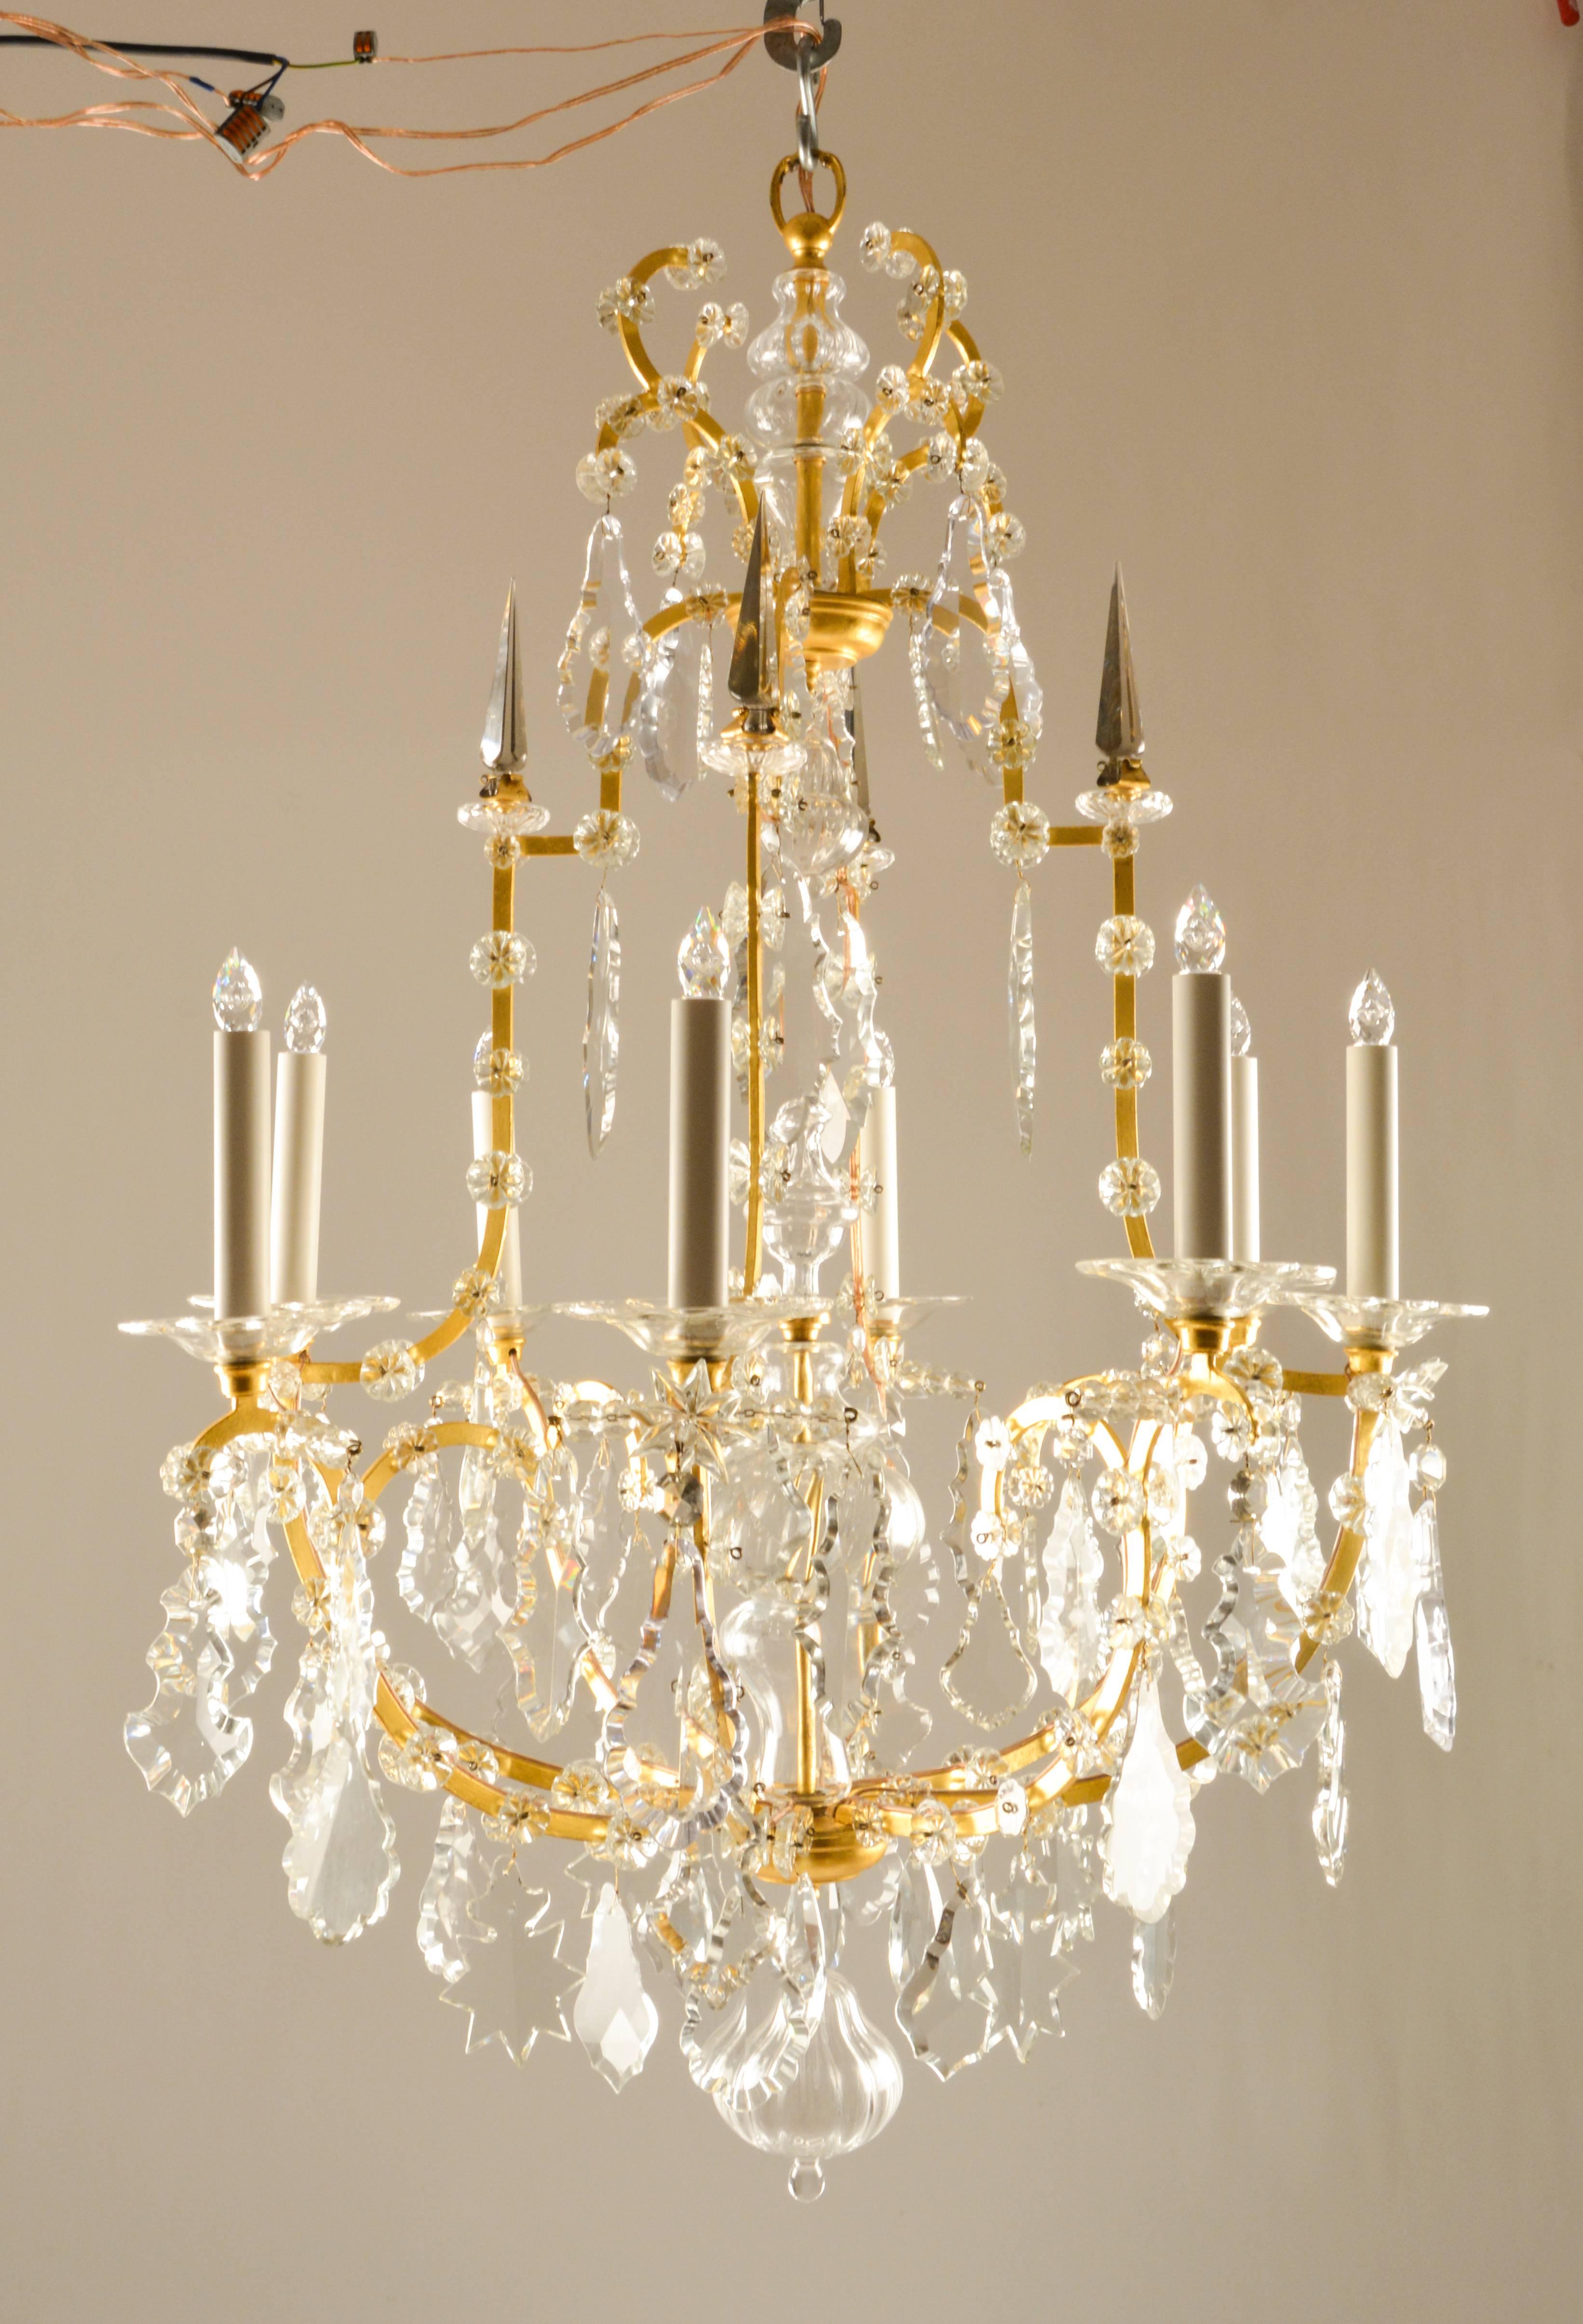 Wonderful example of an early Baroque chandelier for eight candle bulbs in the style of Karl VI, father of Maria Theresia. This type reinterprets their French Baroque model in a clean or even modern way.
With its younger and more common examples it